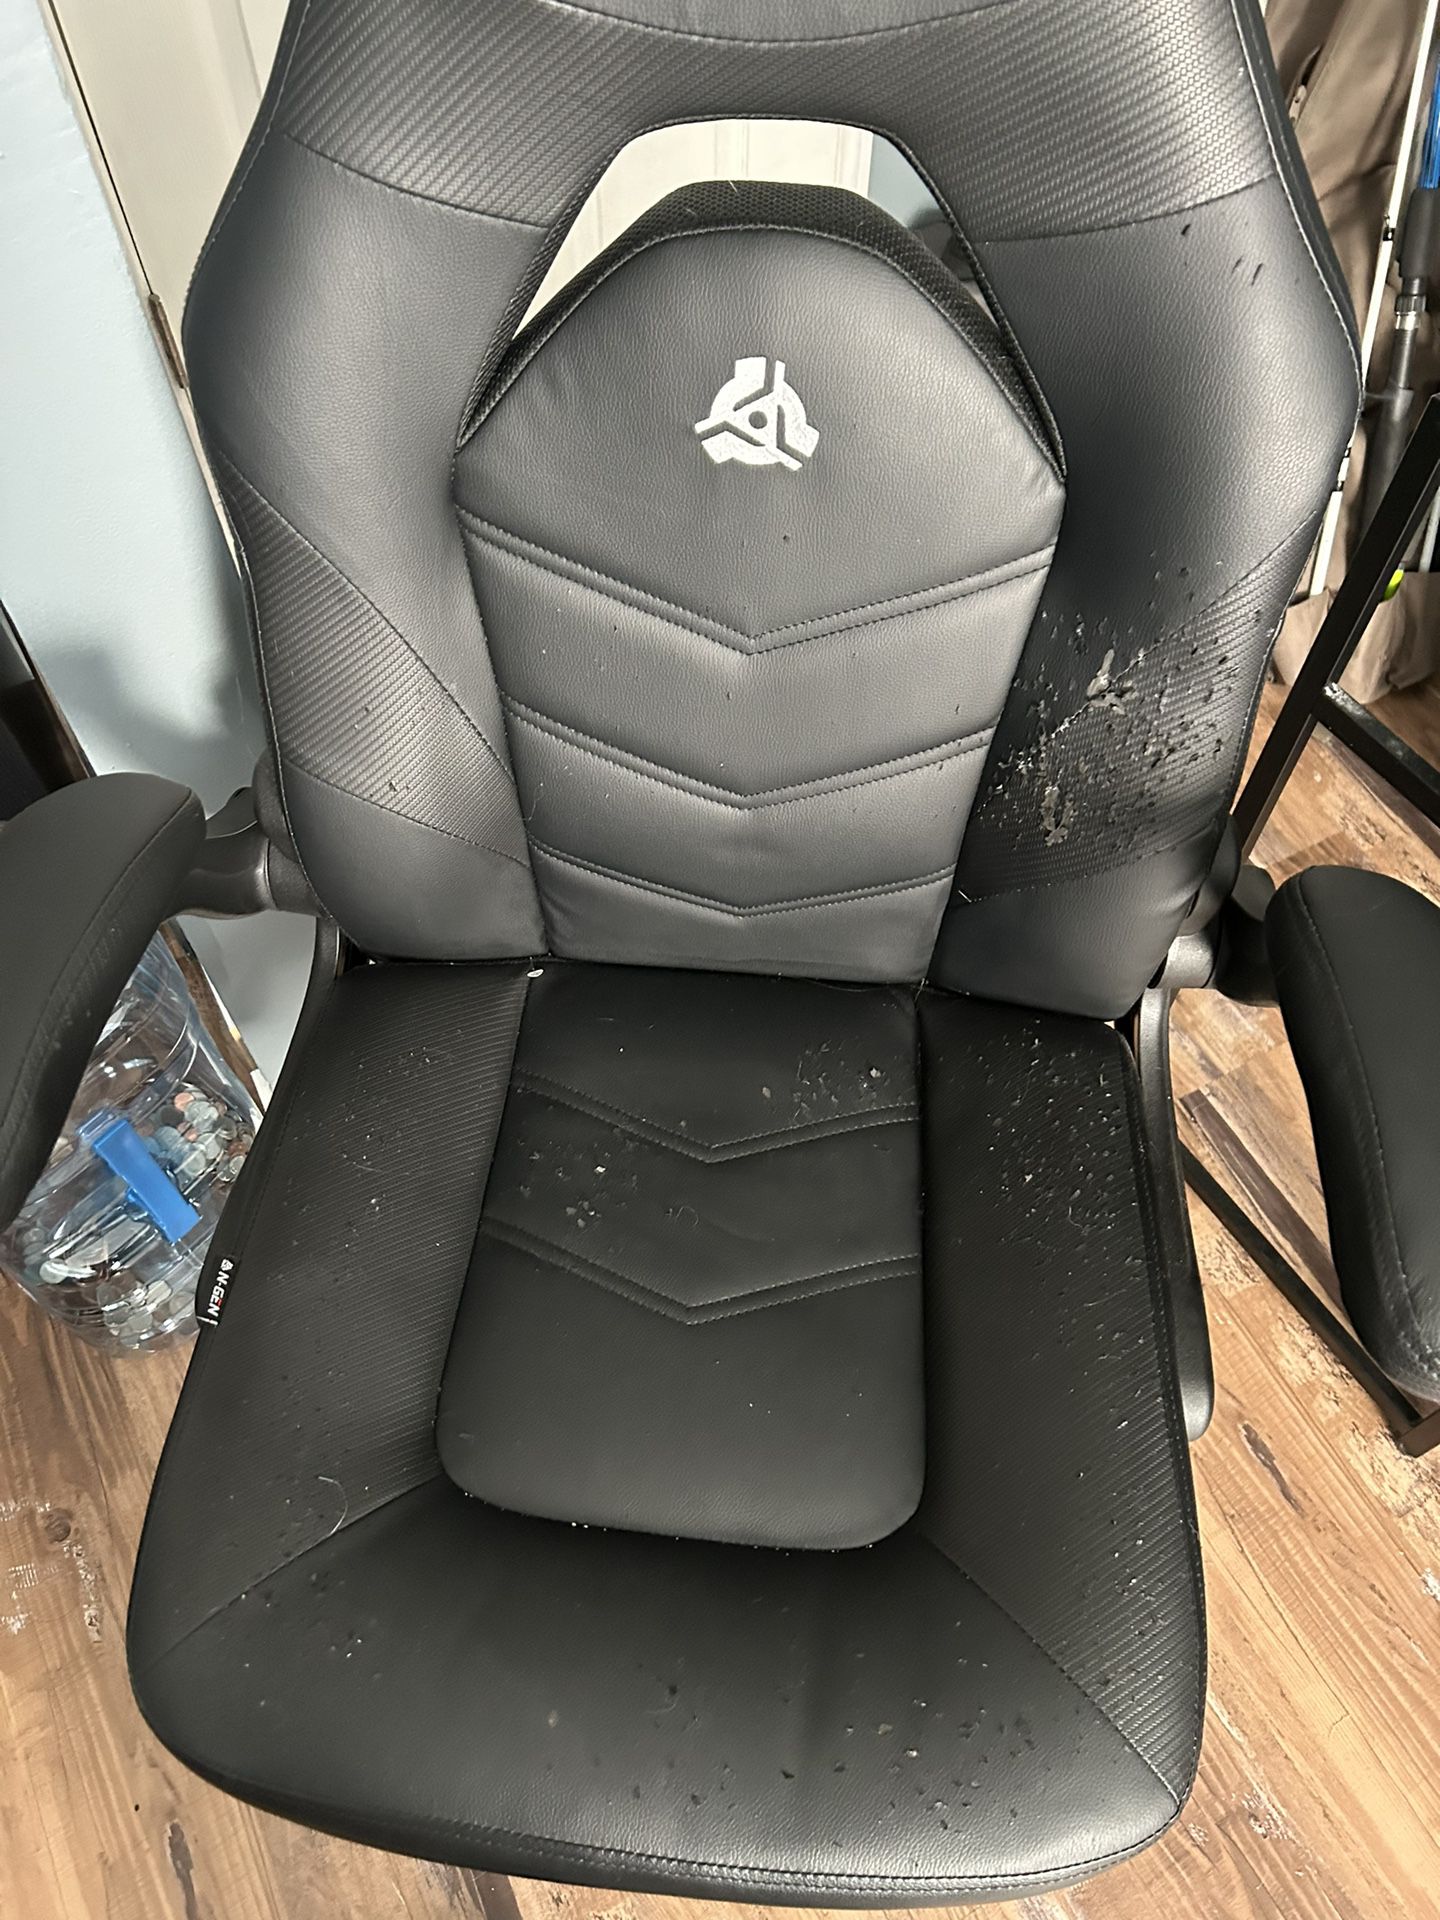 Gaming Chair , Check The Picks Before Messaging 